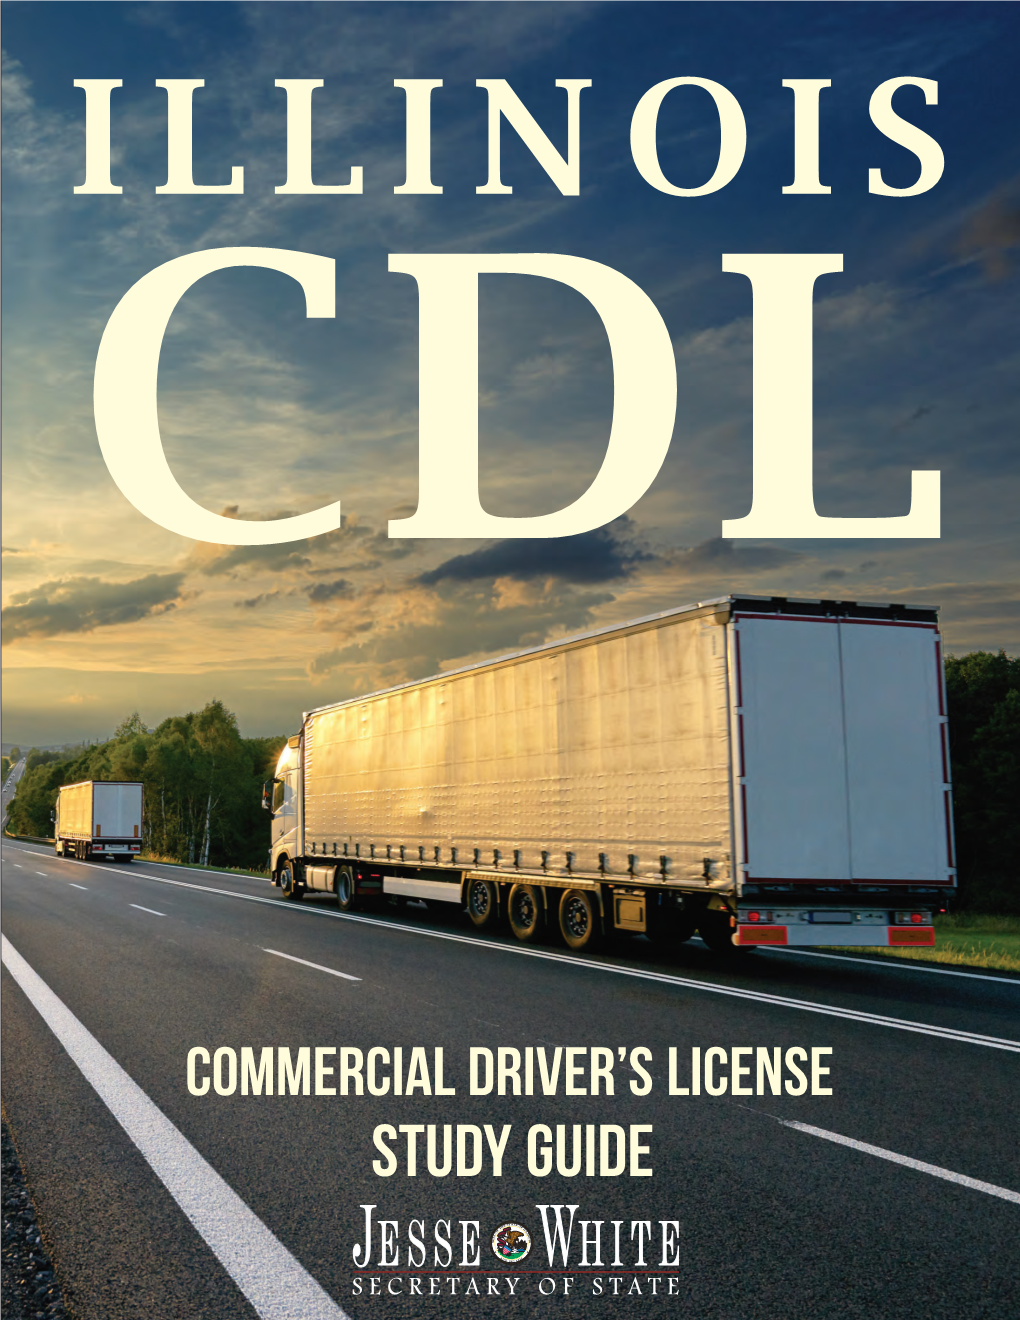 CDL Study Guide Thoroughly Prior to Scheduling and Taking the Required Exams